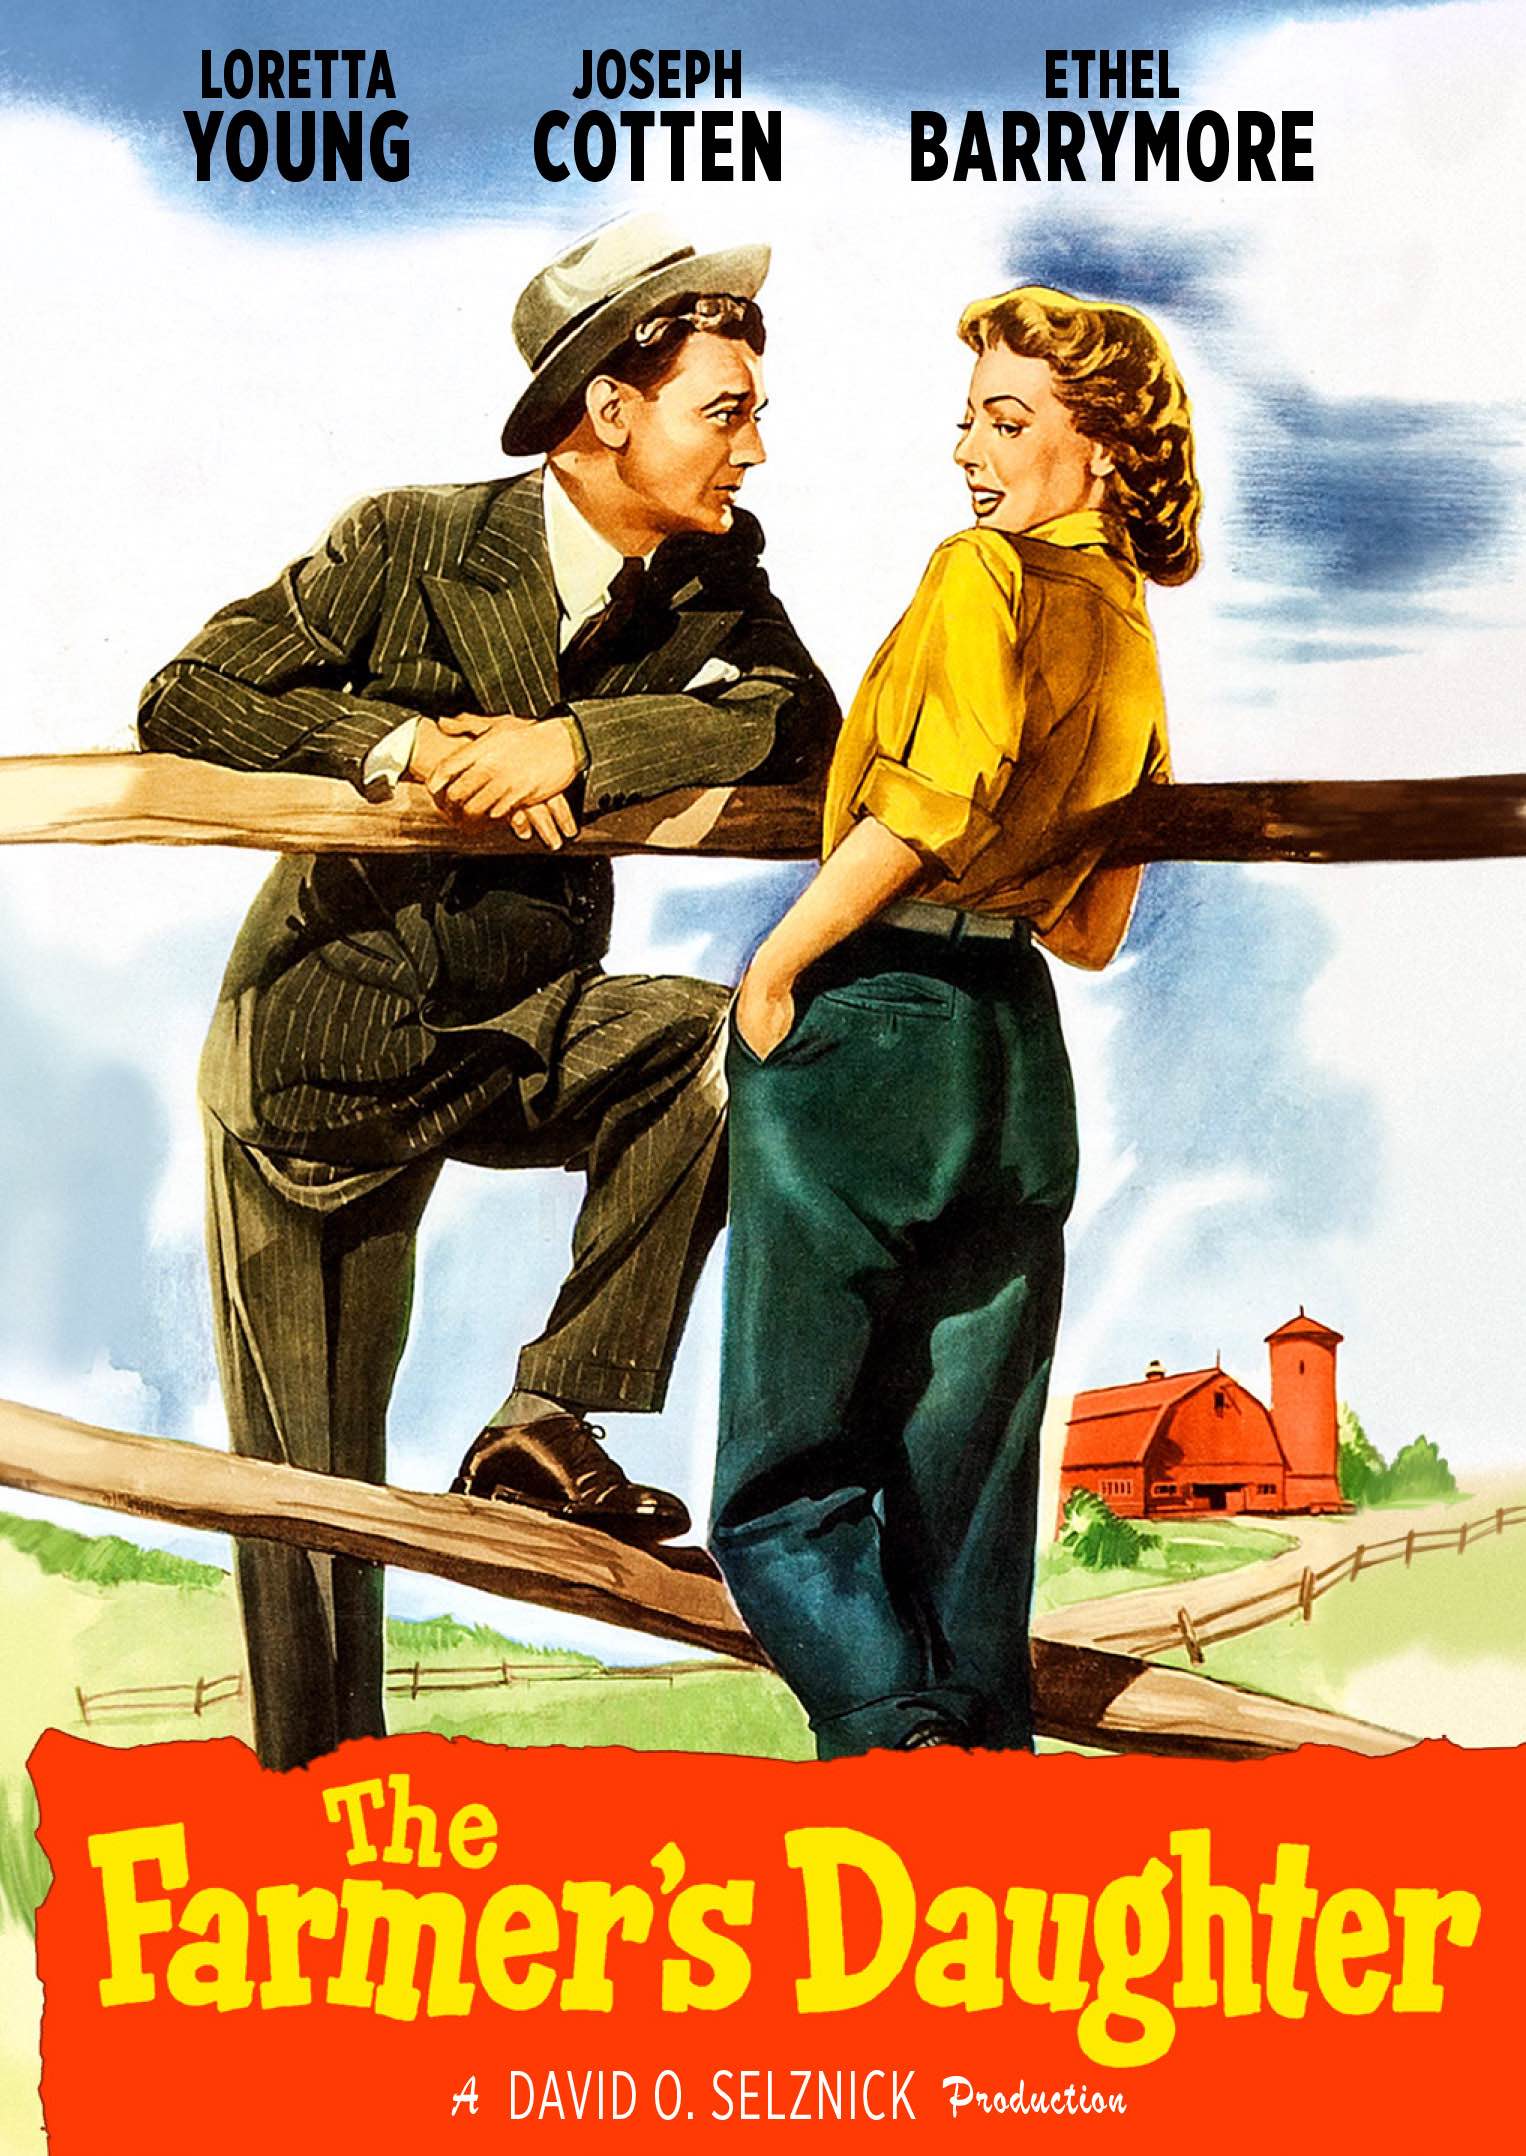 The Farmers Daughter [dvd] [1947] Best Buy